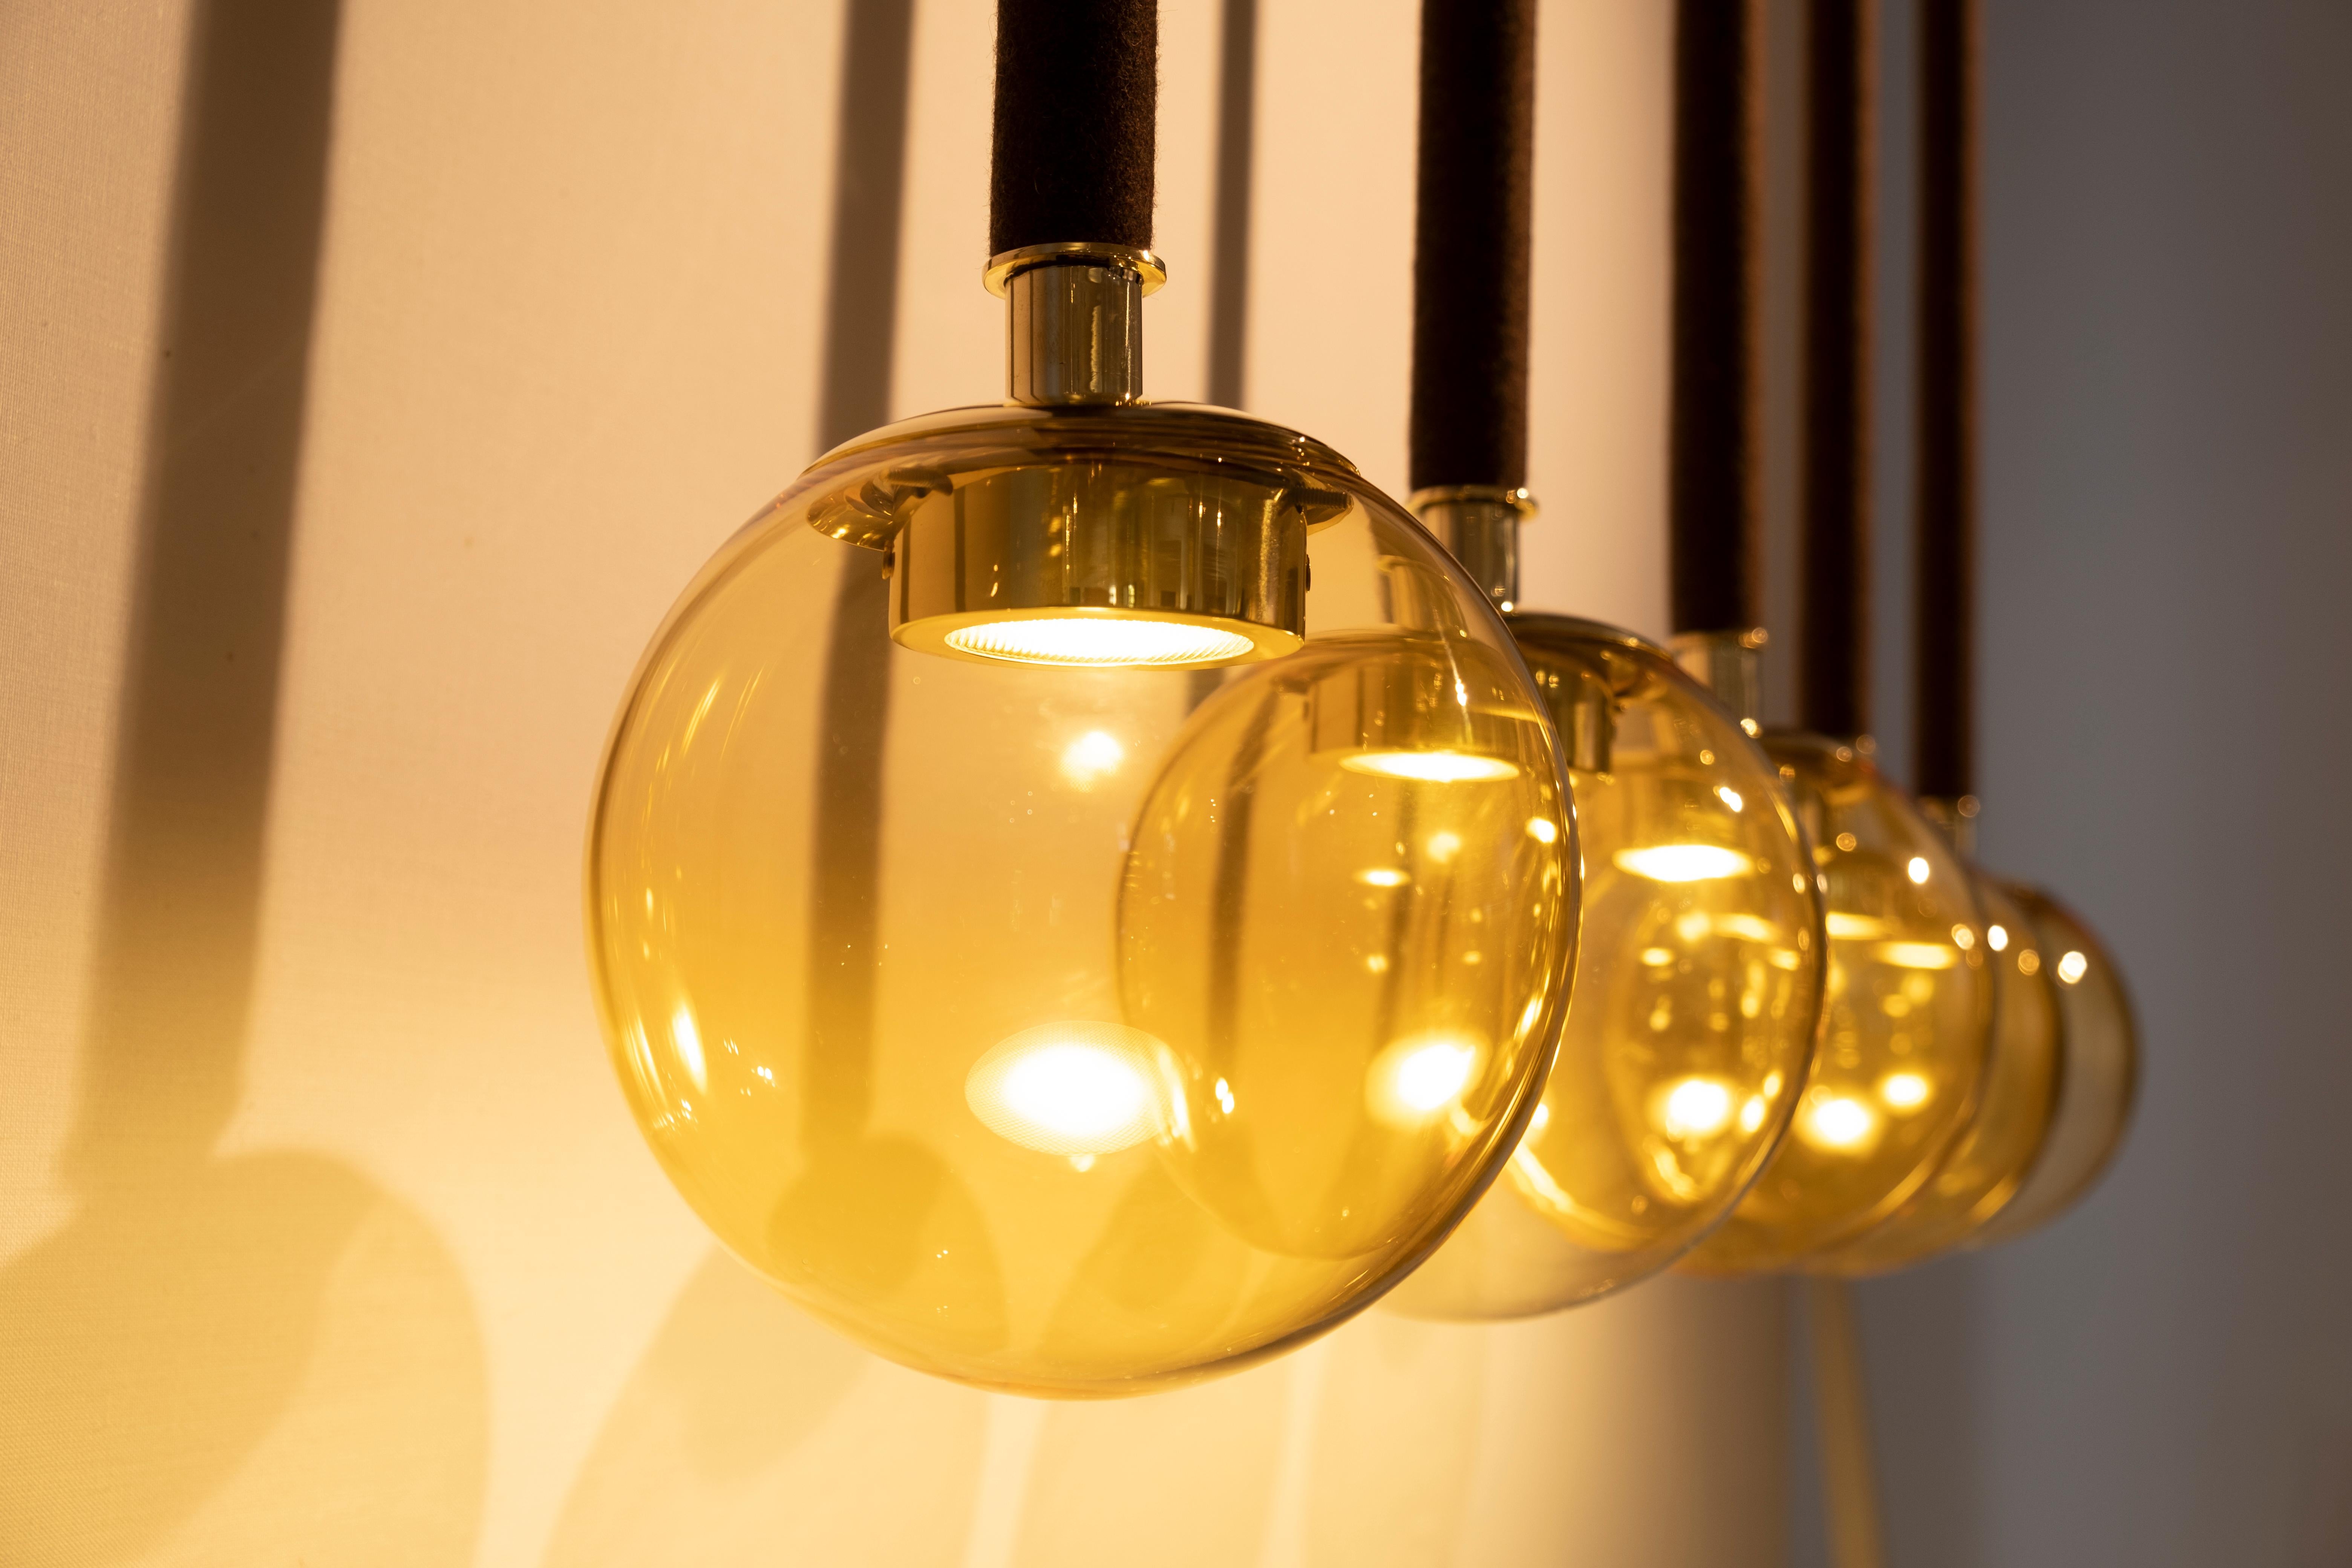 21st century Filippo Feroldi Suspension lamp Murano glass and brass various colors.
Designed by Filippo Feroldi and realised in collaboration with Colleoni Arte, Magus is a light installation made up of twenty-five blown glass spheres of 18 cm